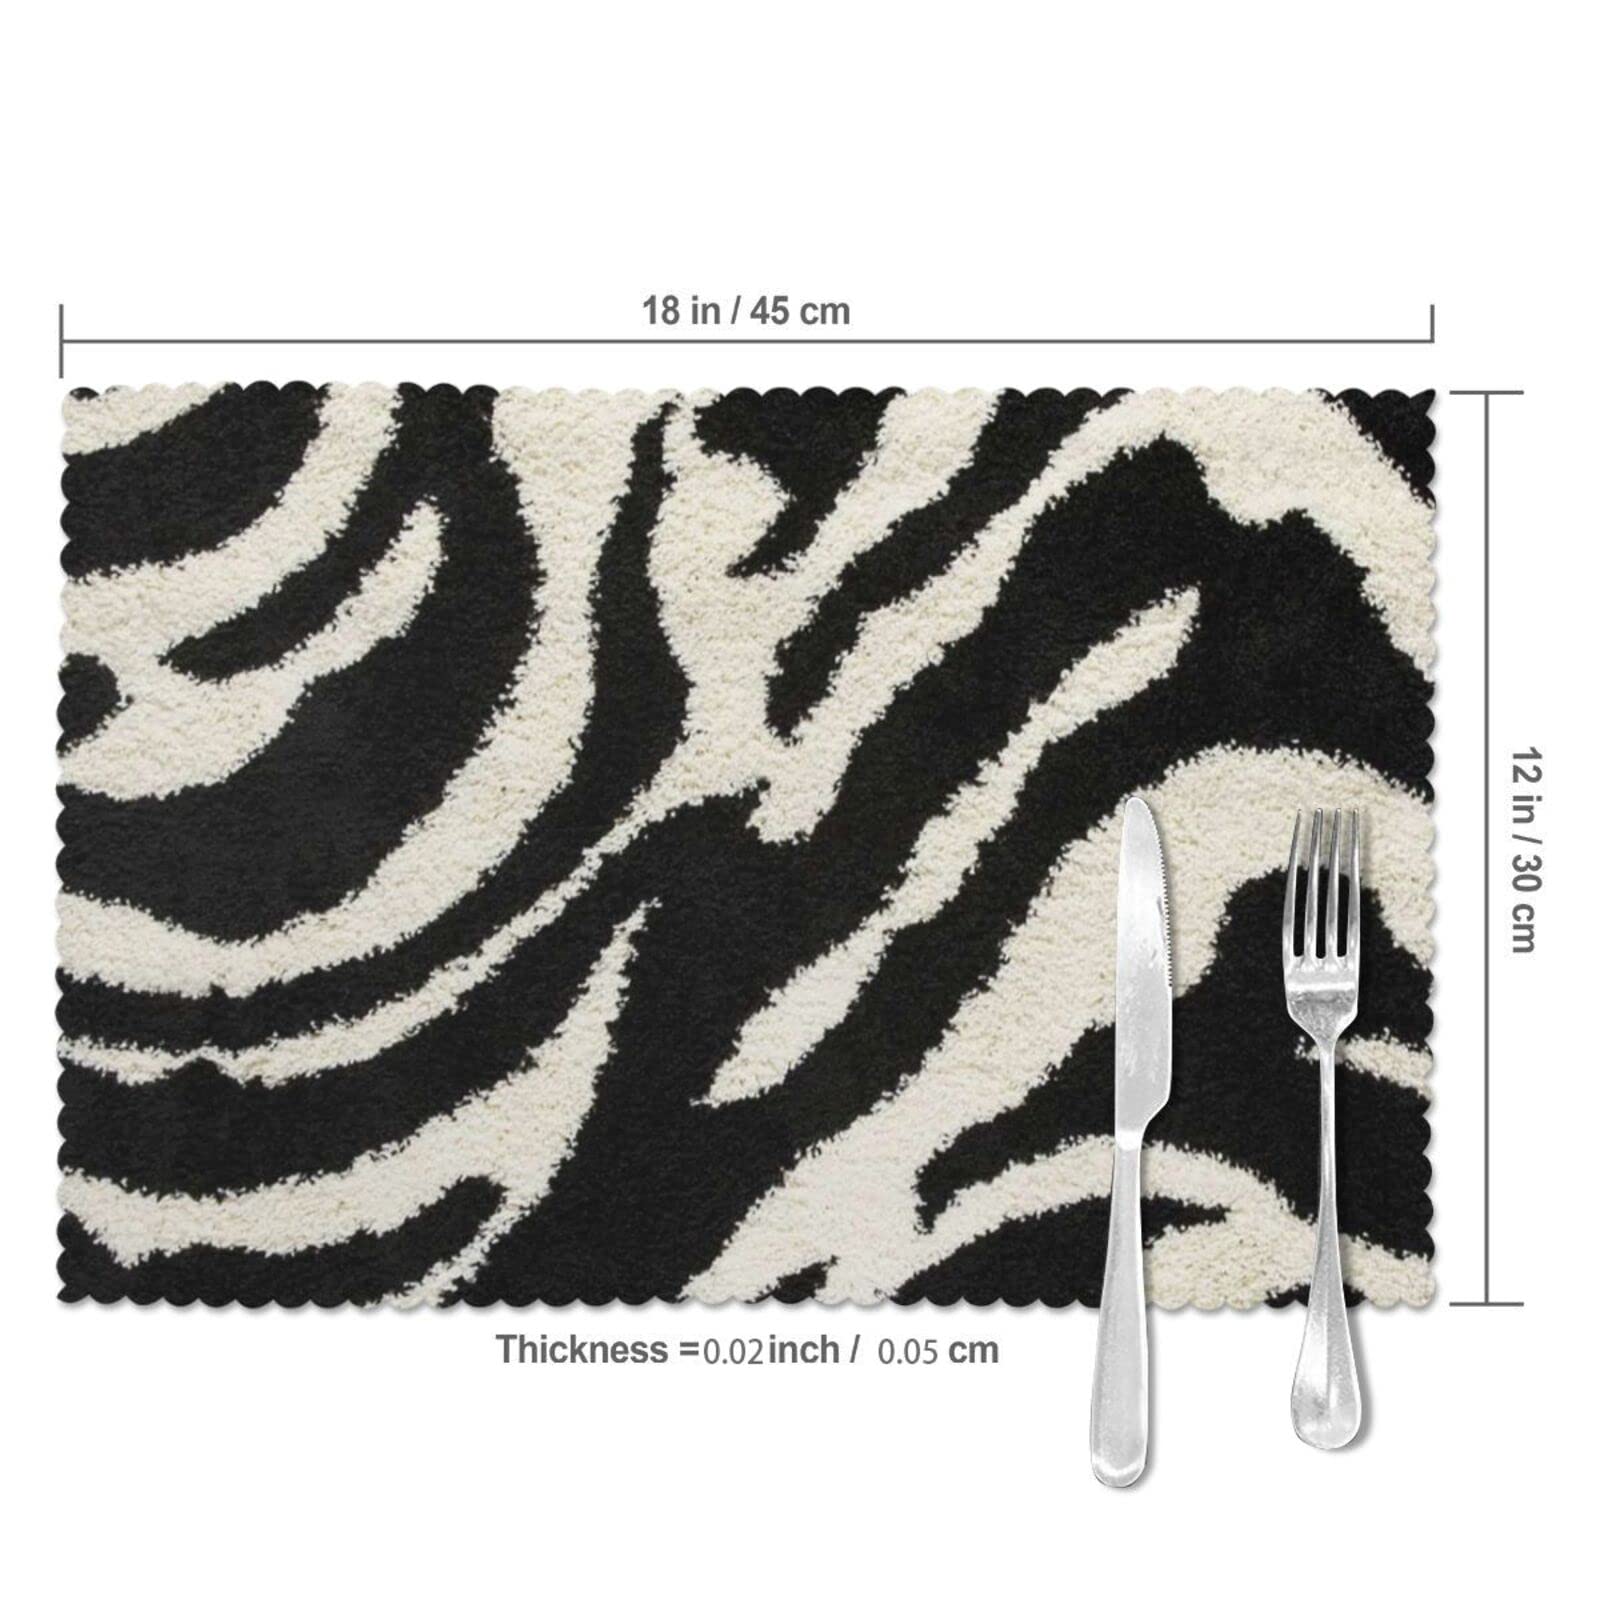 Zebra Animal Print Heat-Resistant Placemats Set of 6,Kitchen Restaurant Washable and Non Slip Tableware Mat 12x18 in